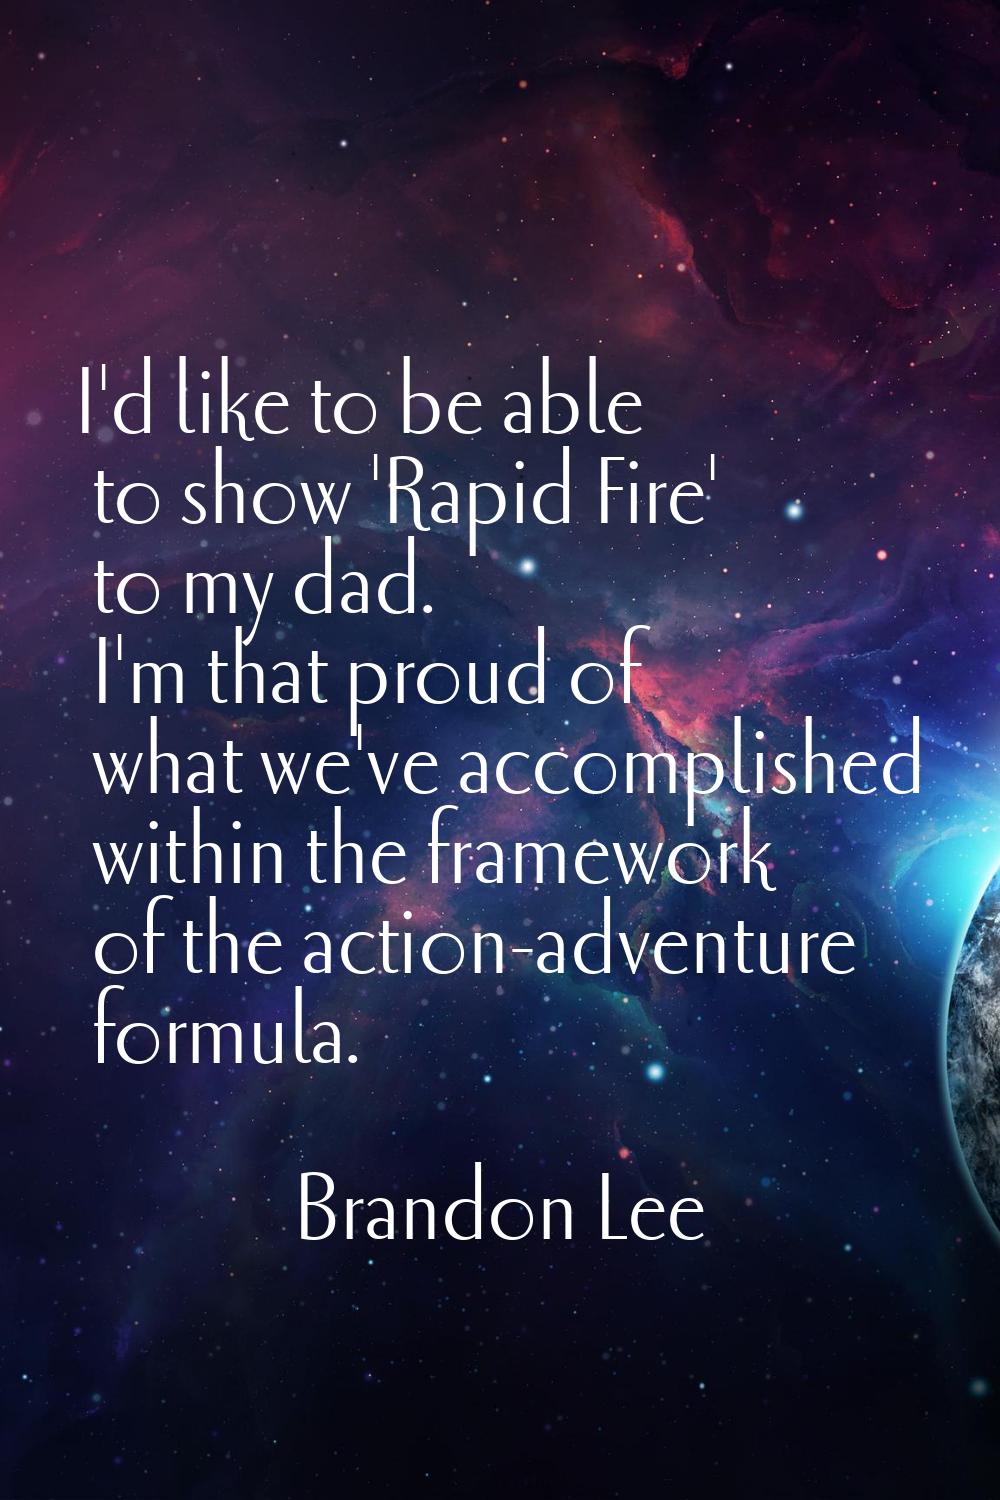 I'd like to be able to show 'Rapid Fire' to my dad. I'm that proud of what we've accomplished withi